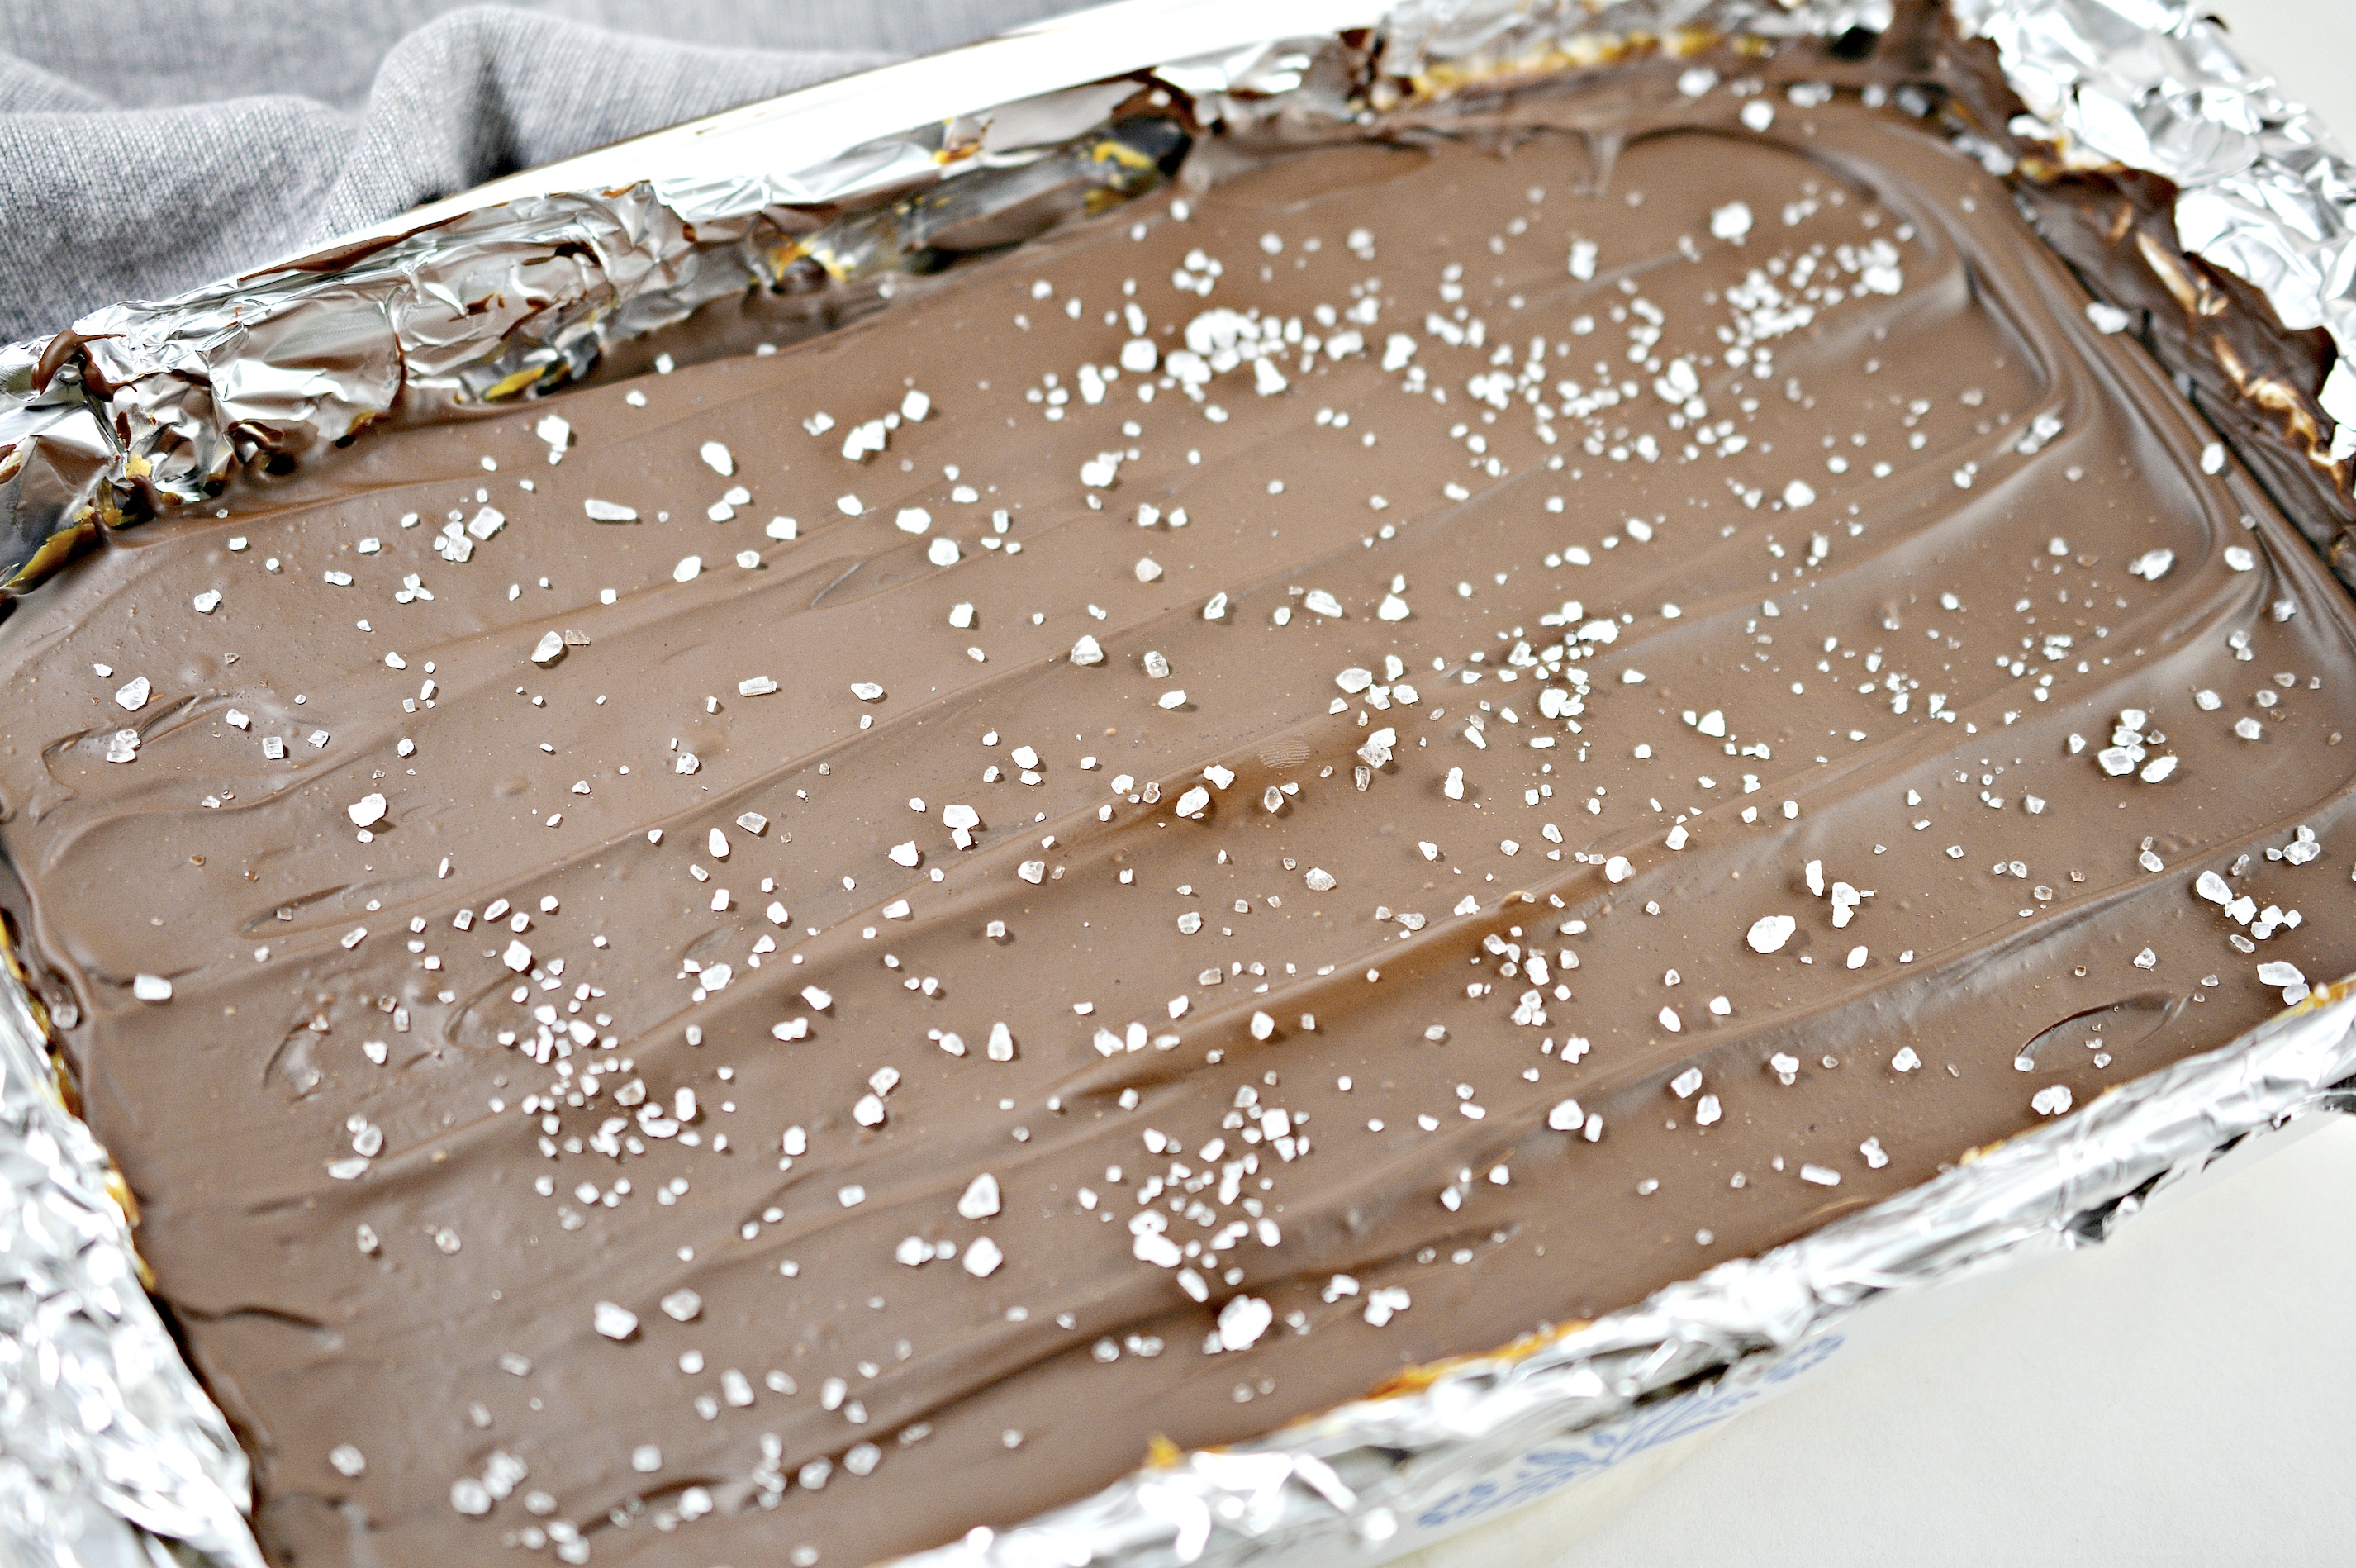 If you love chocolate and caramel, you’ll love this easy Caramel Slice recipe made with AMERICAN HERITAGE Finely Grated Baking Chocolate! #ad #baking #familybaking #bakingguide @Chochistory